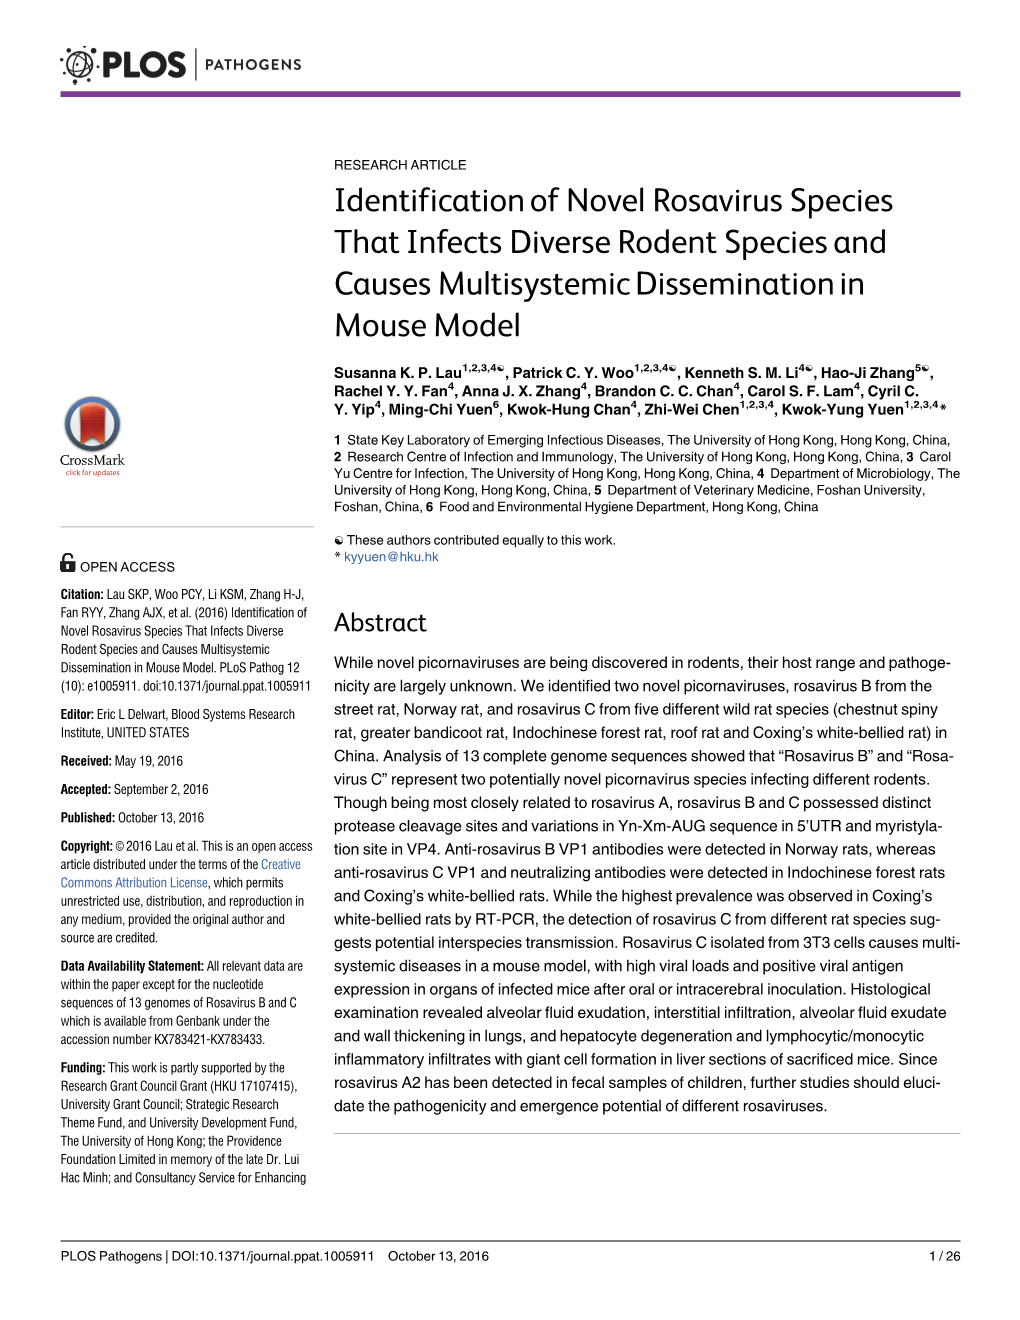 Identification of Novel Rosavirus Species That Infects Diverse Rodent Species and Causes Multisystemic Dissemination in Mouse Model